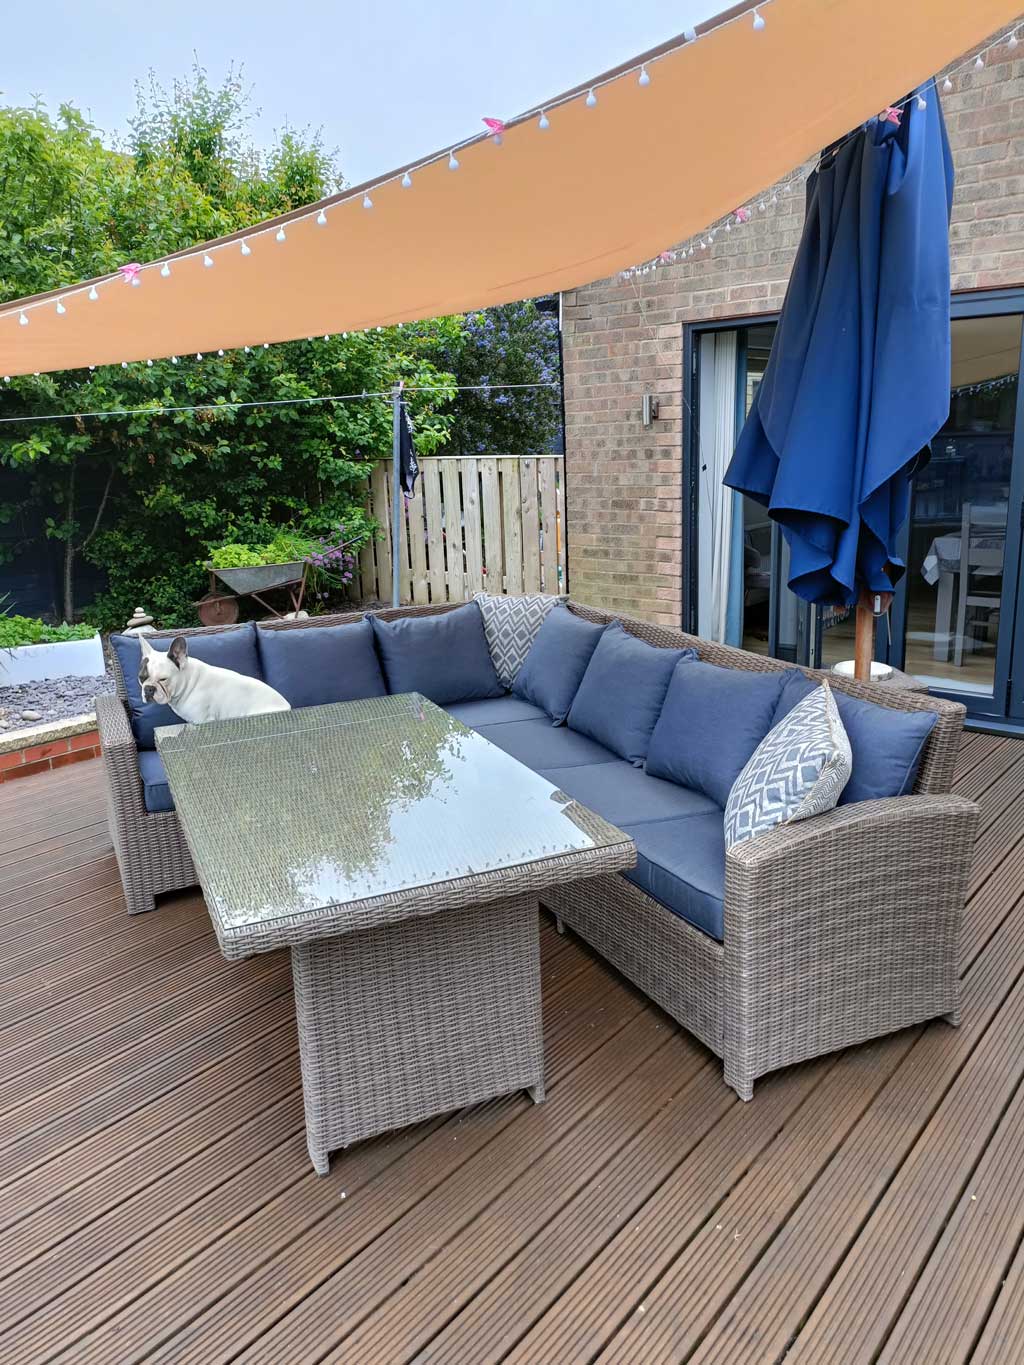 Bespoke Manufacturers Of Outdoor Sofa Covers Derbyshire 